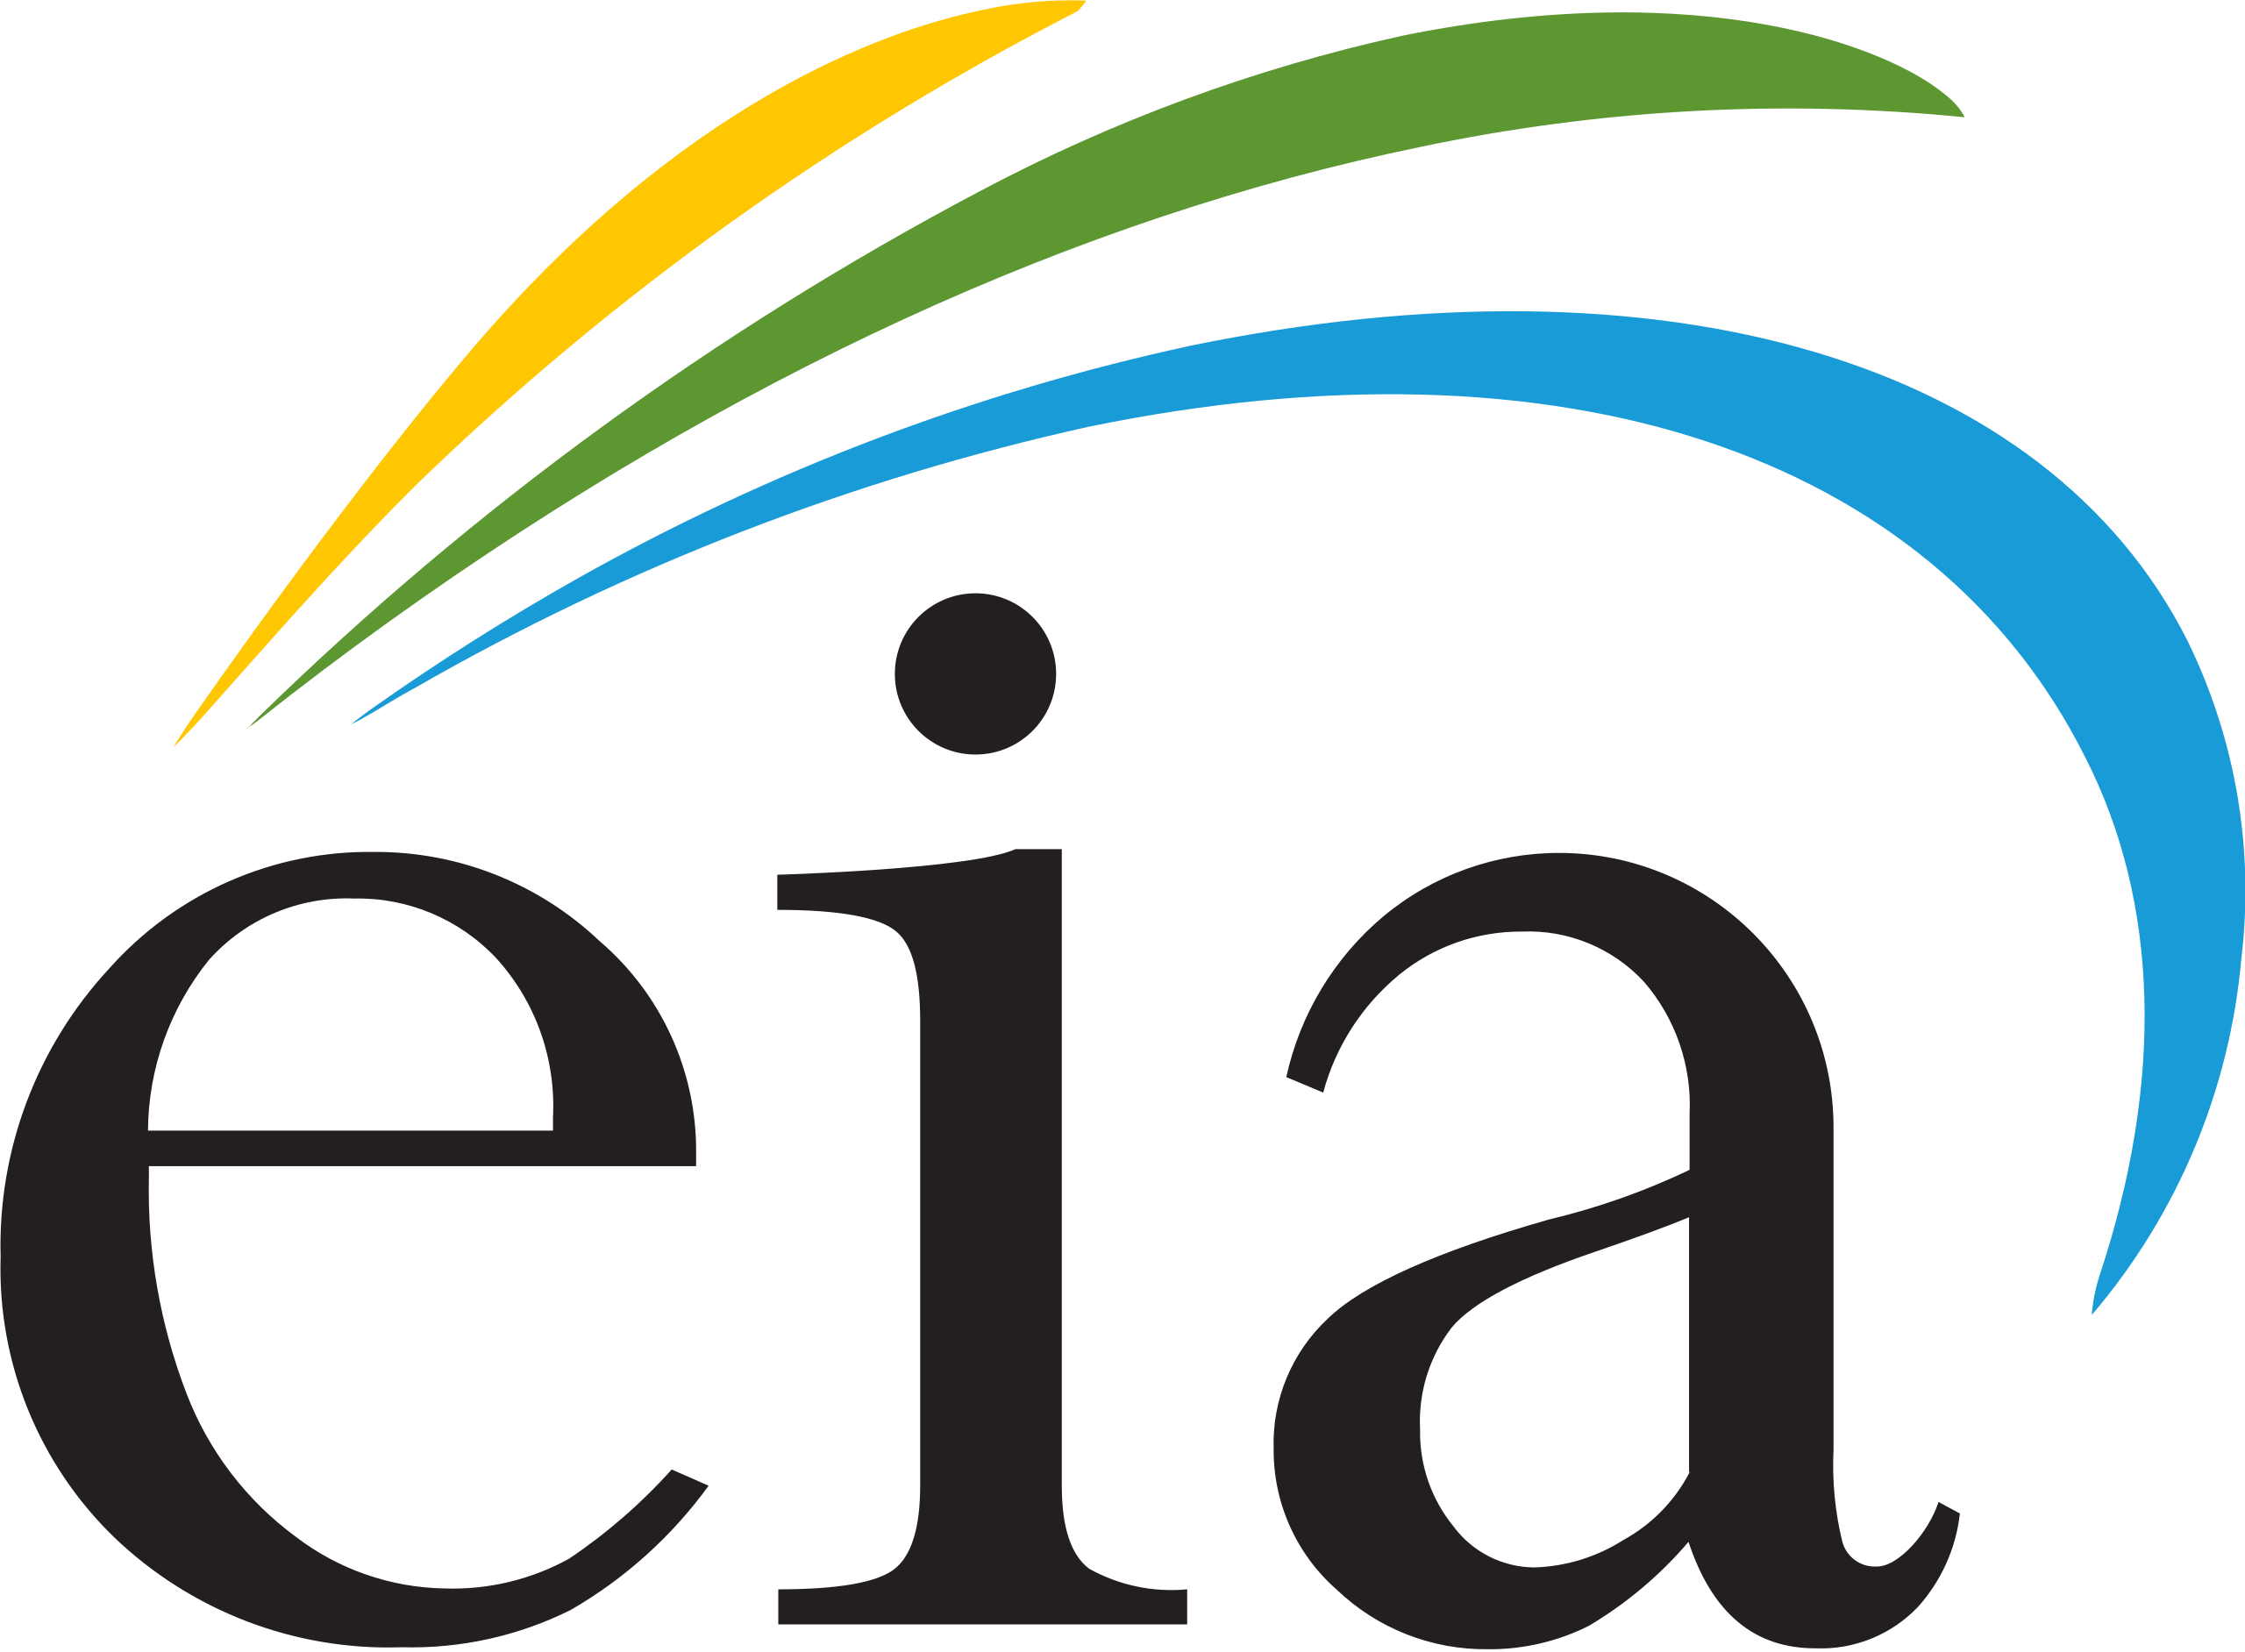 logo for Energy Information Administration, Department of Energy